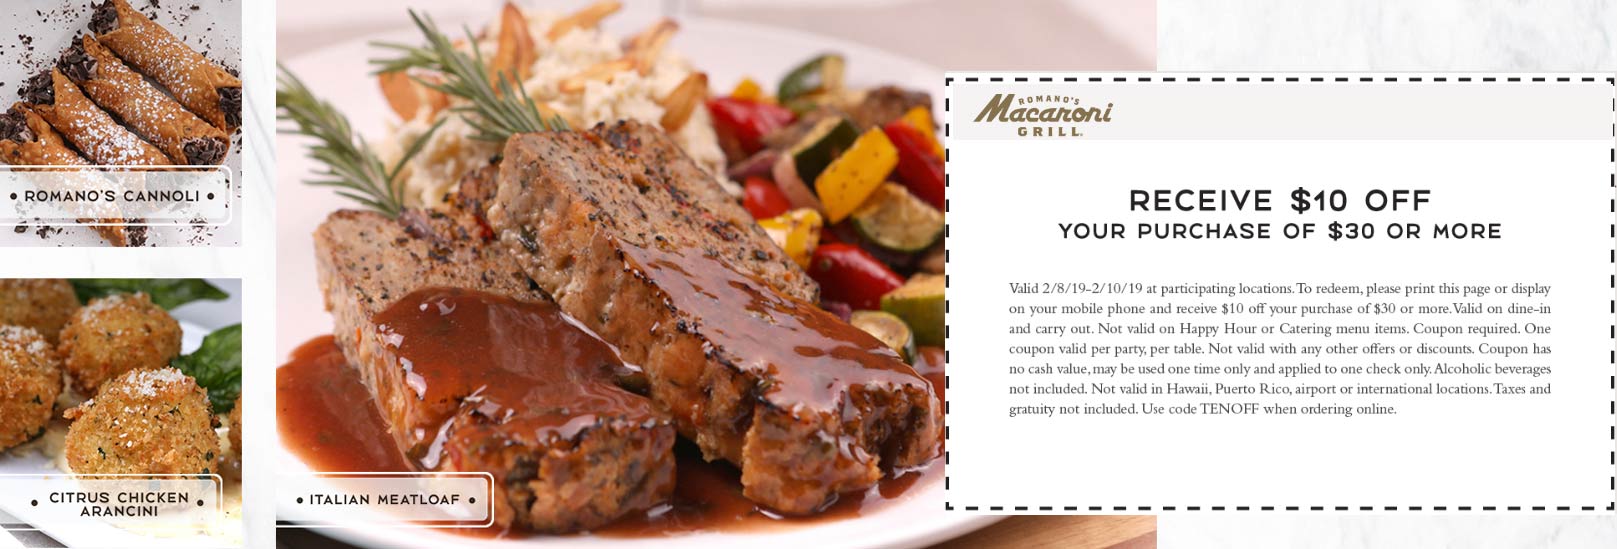 Macaroni Grill coupons & promo code for [October 2022]